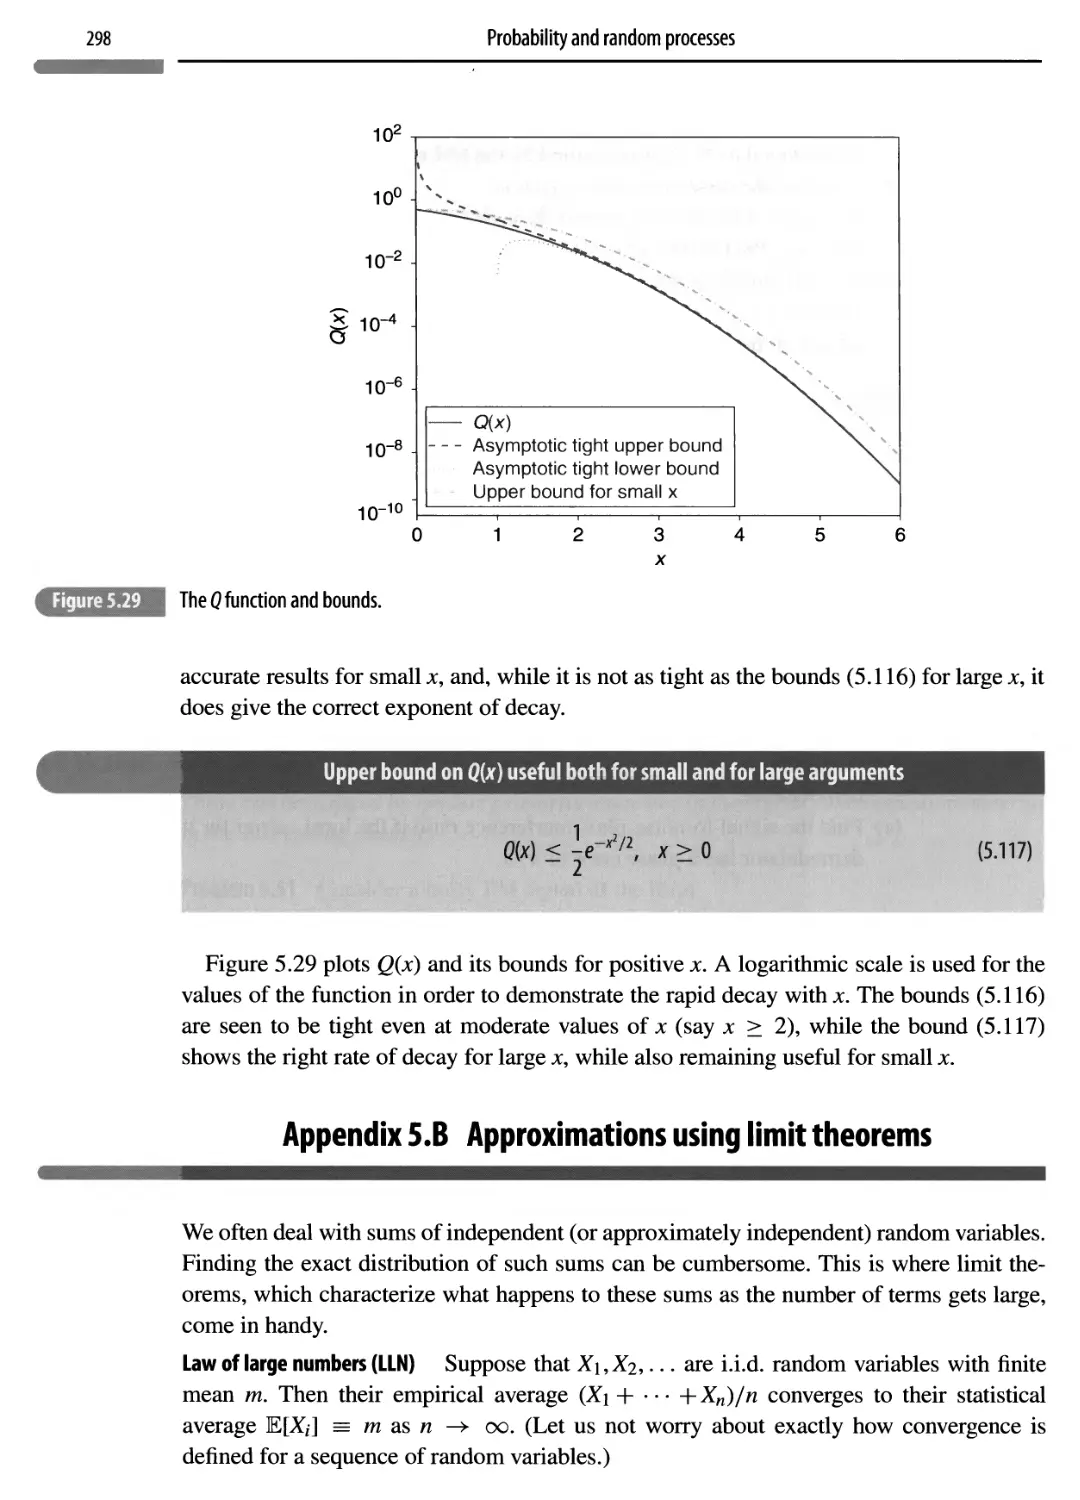 Appendix 5.B Approximations using limit theorems 298